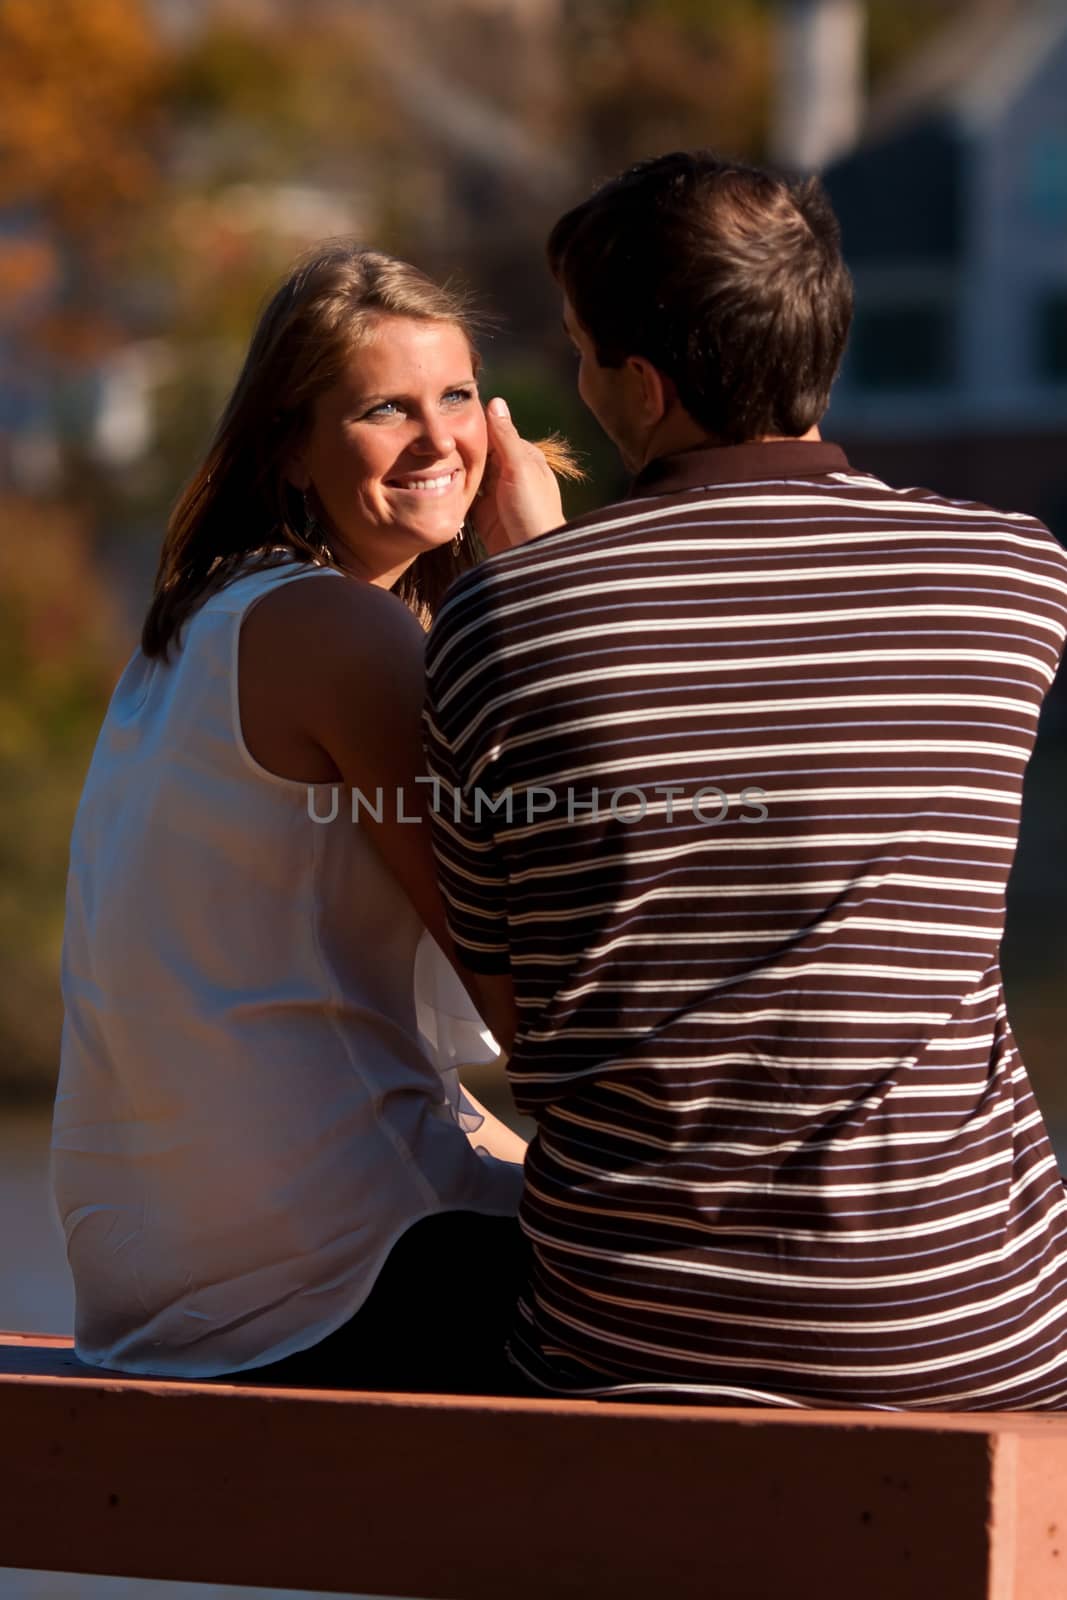 A young man gently caresses the smiling, sunlit face of his girlfriend while sitting on a bench.